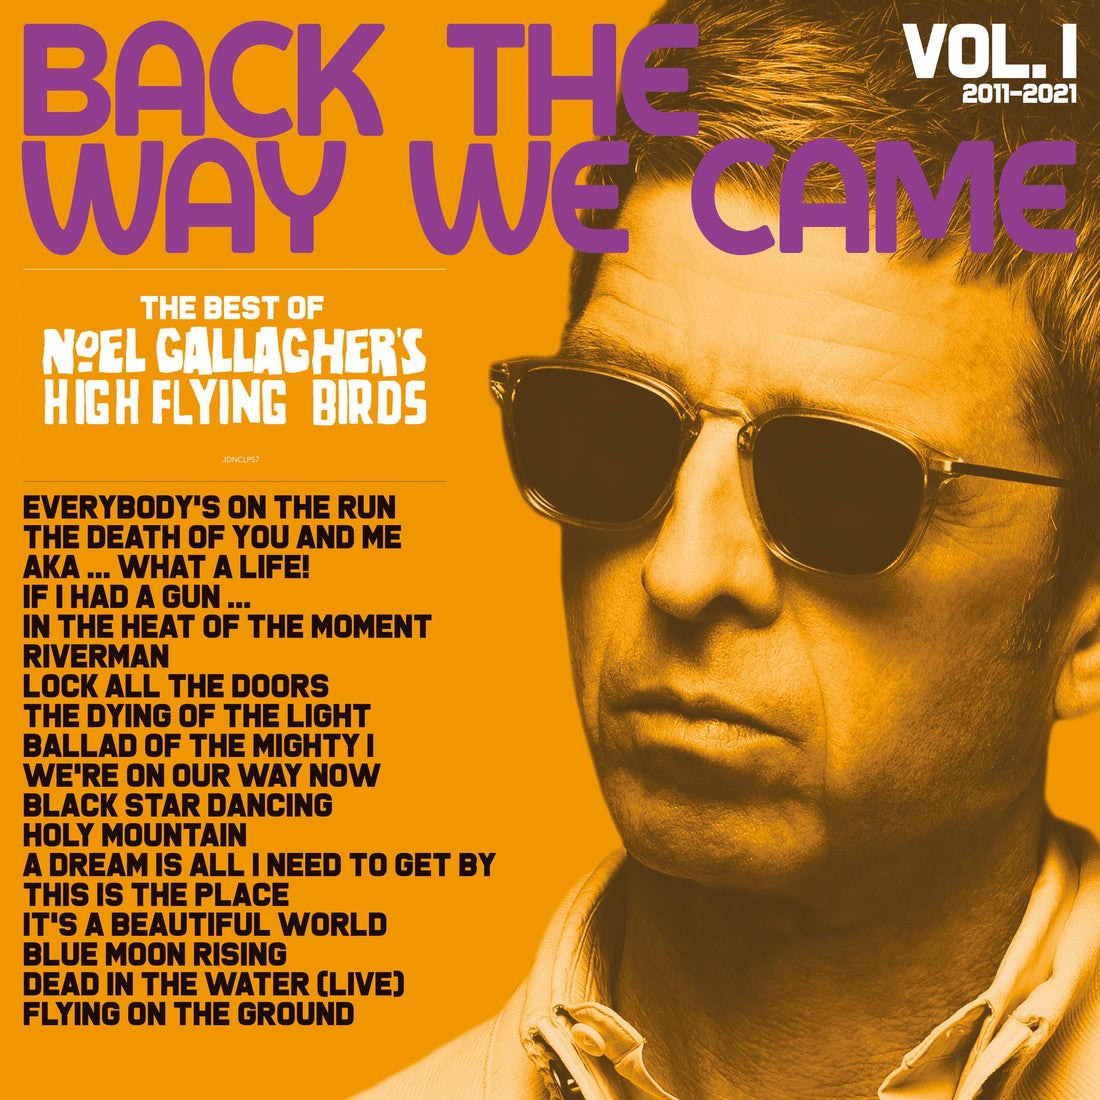 Noel Gallagher Presents The Best of The 1st 10 Solo Years